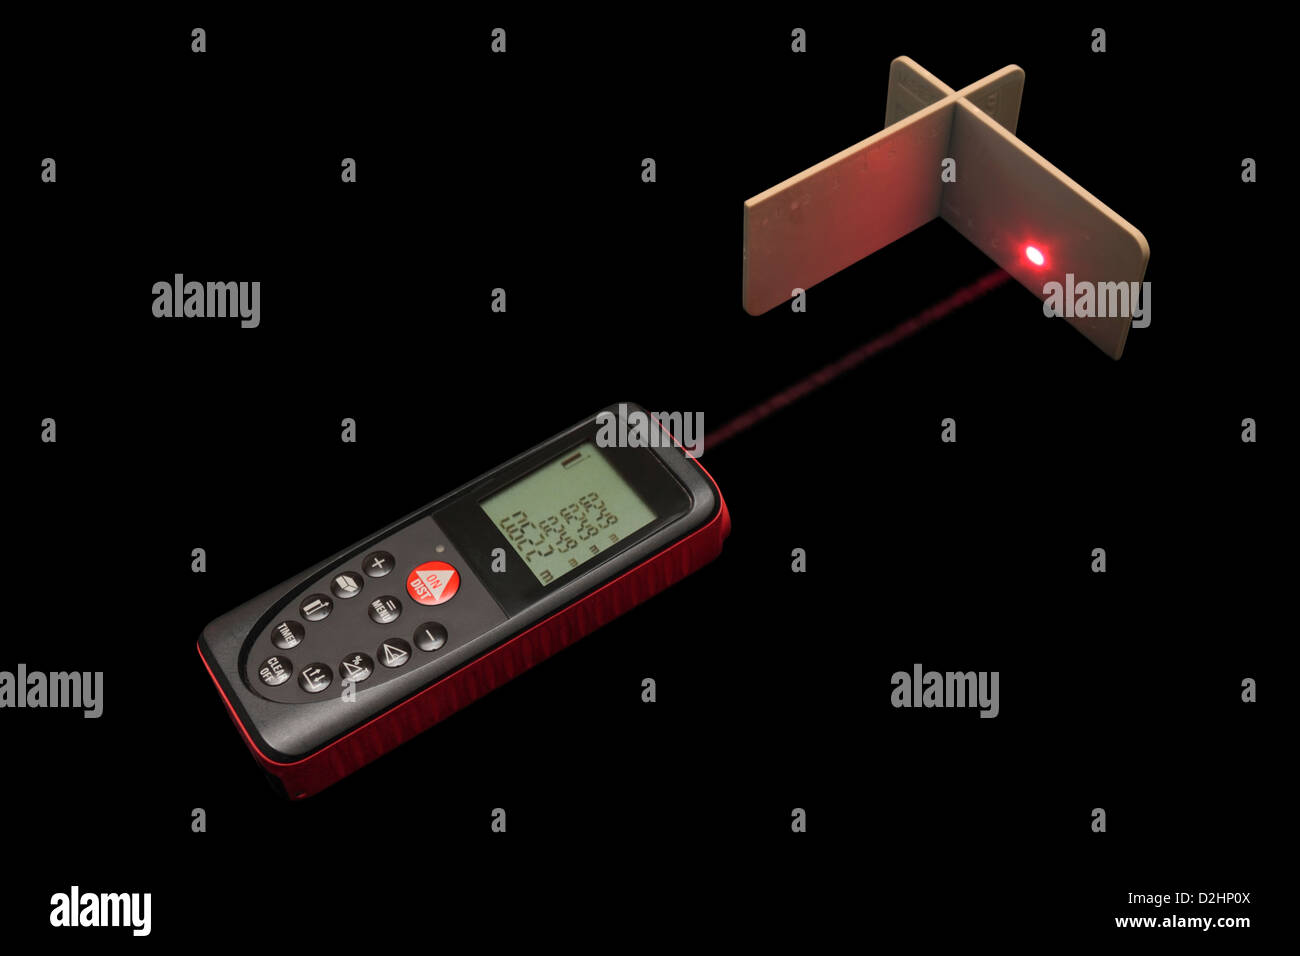 Leica Disto Meter D3 aimed at a grey target isolated on black background Stock Photo